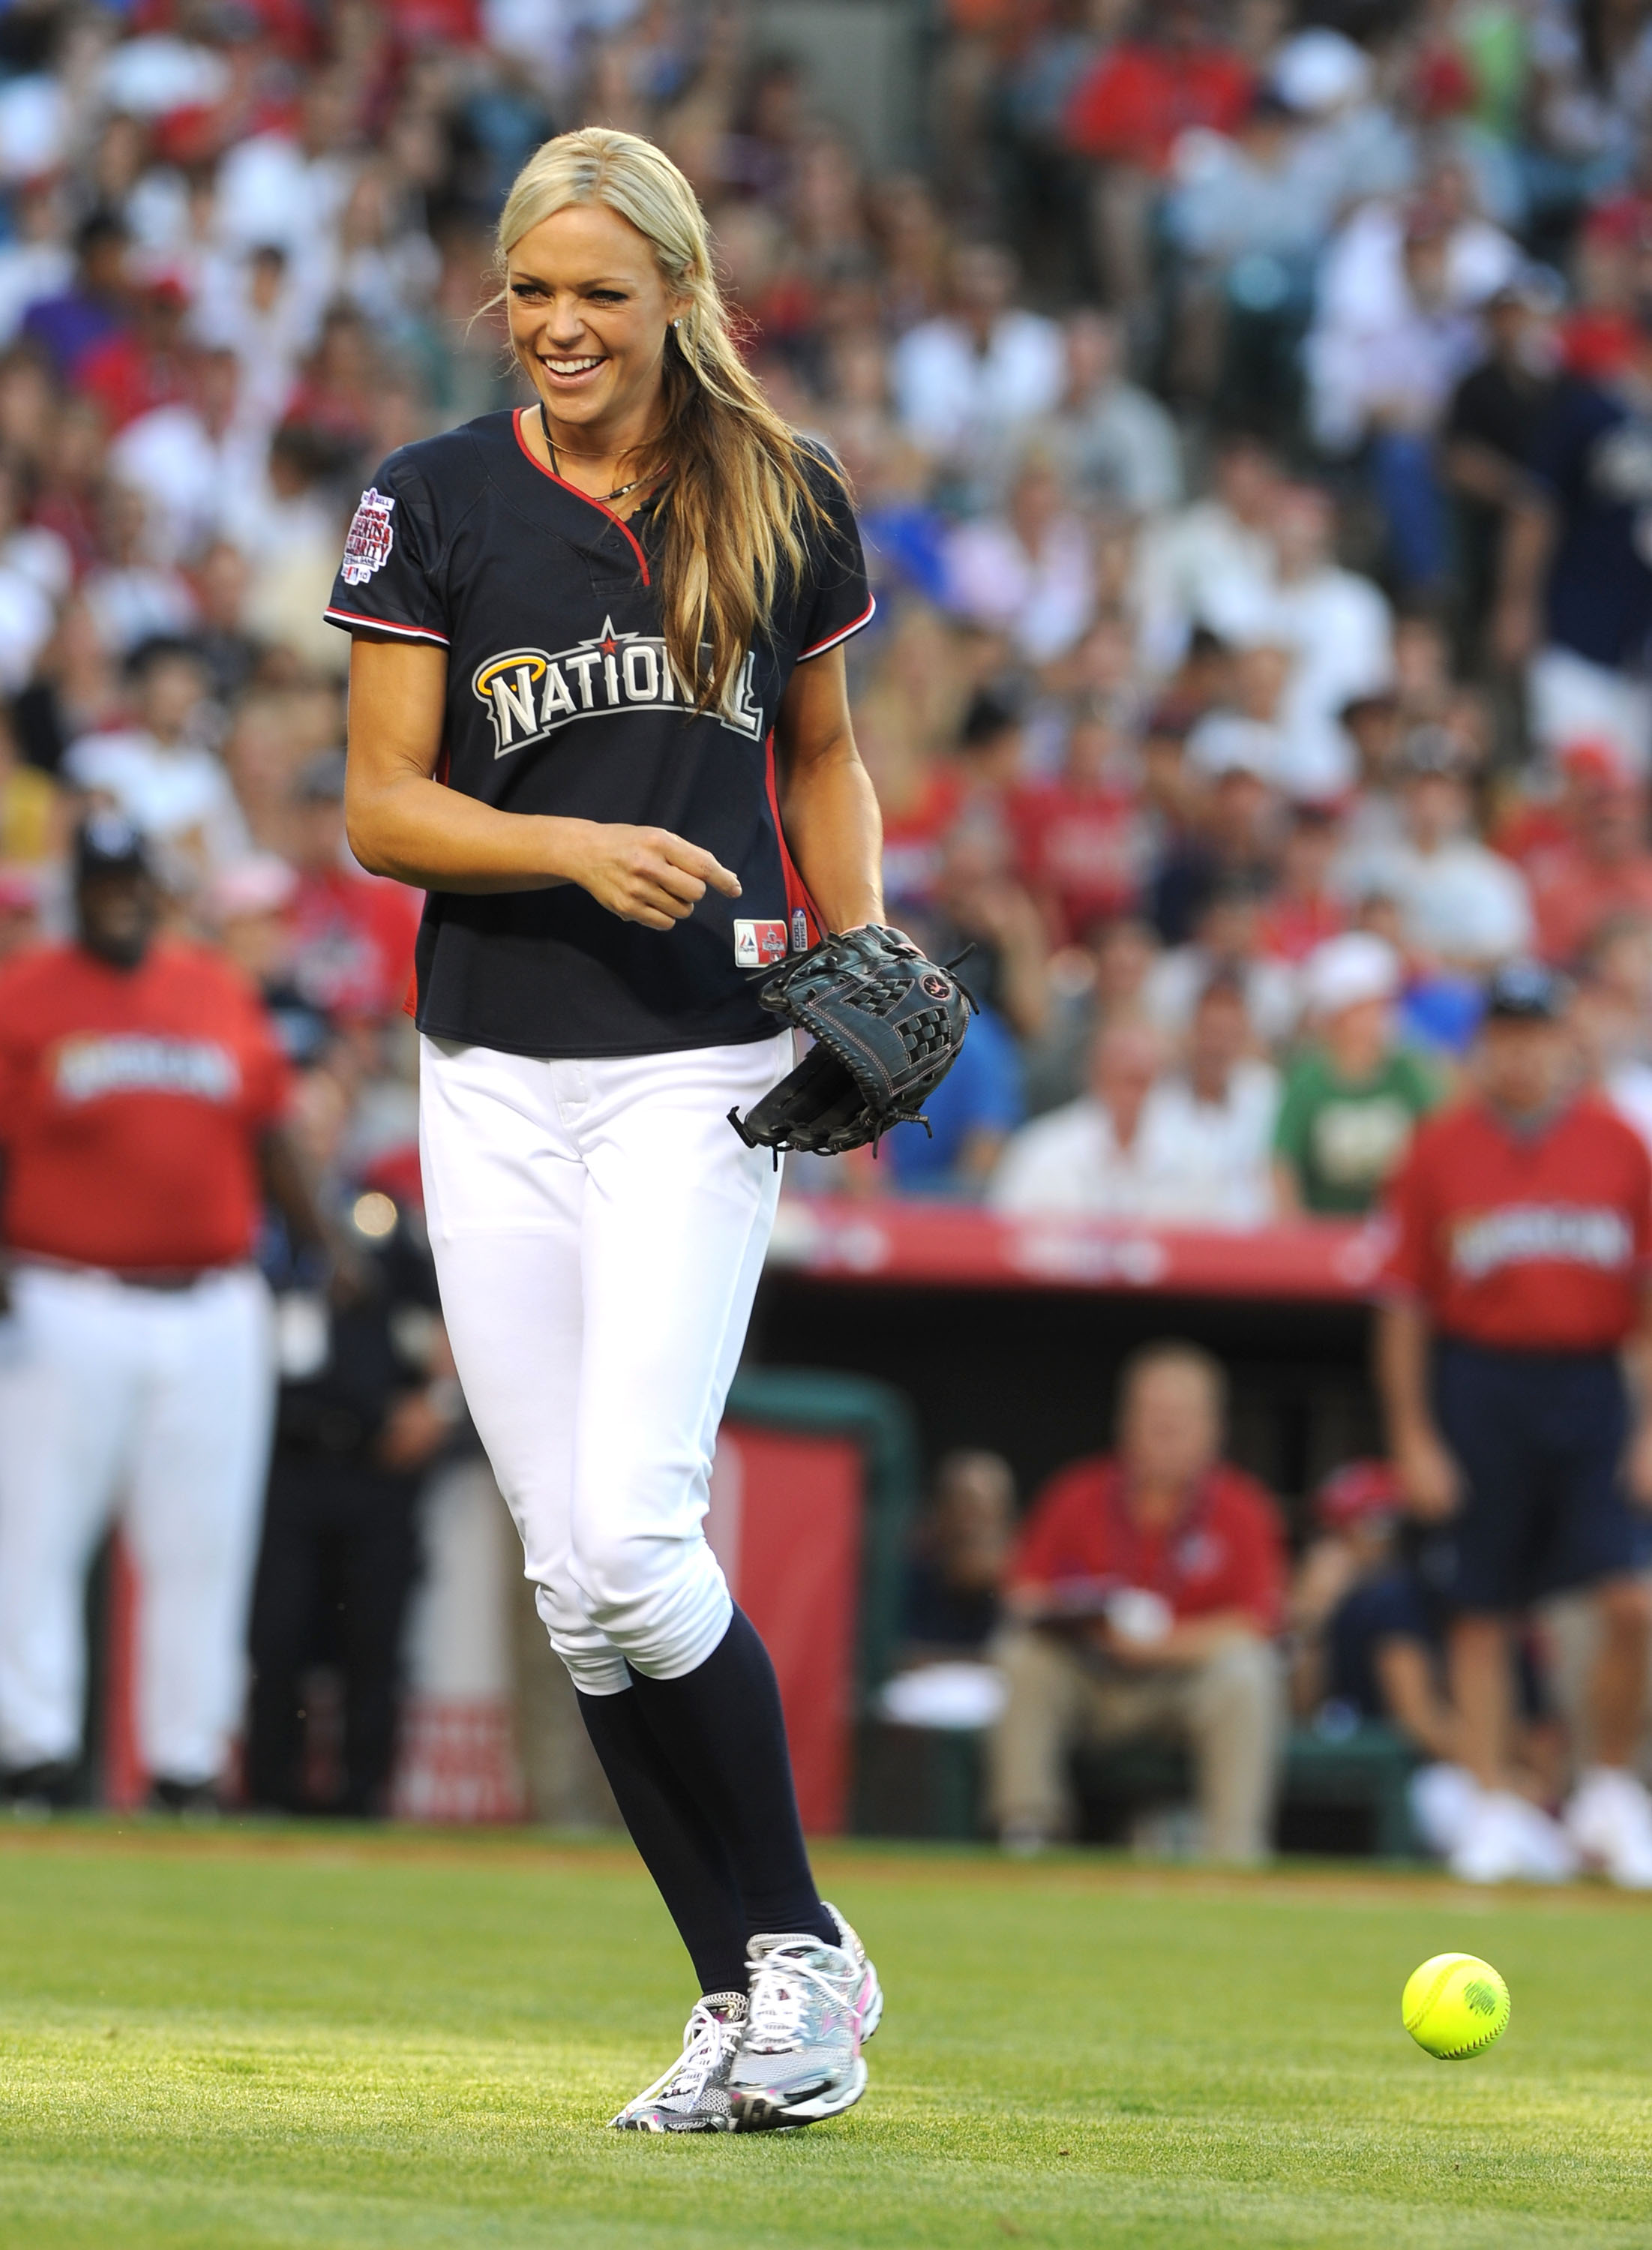 ANAHEIM, CA - JULY 11:  Softball Olympic gold medalist Jennie Finch pitches during the MLB All Star Game Celebrity Softball Game at Angels Stadium of Anaheim on July 11, 2010 in Anaheim, California.  (Photo by Michael Buckner/Getty Images)